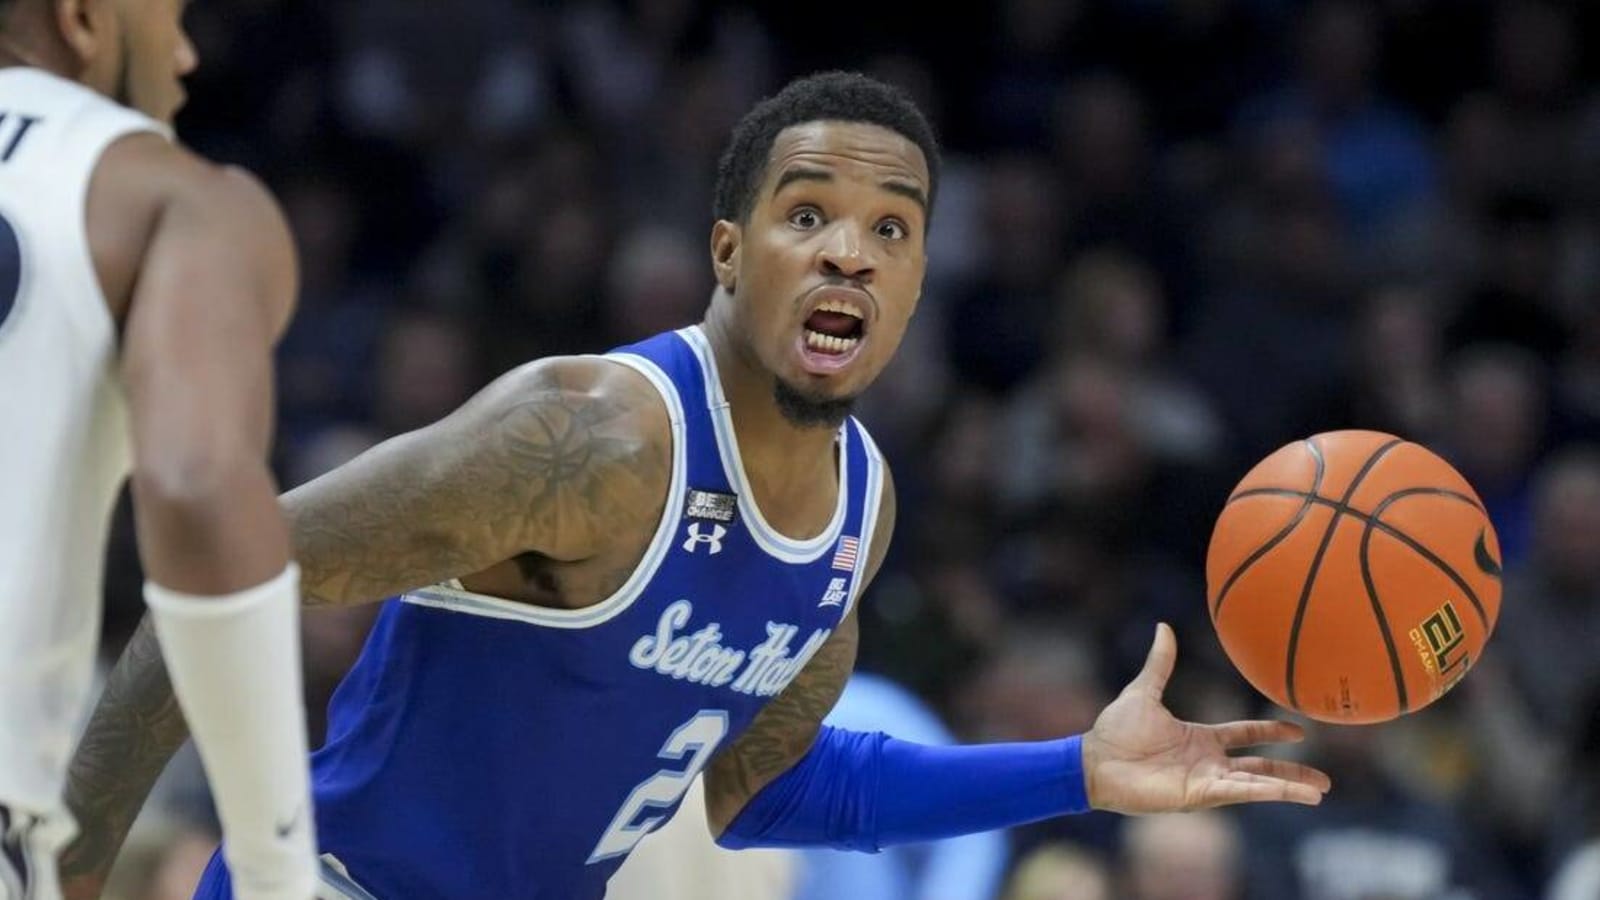 Seton Hall meets Georgetown after attention-getting wins